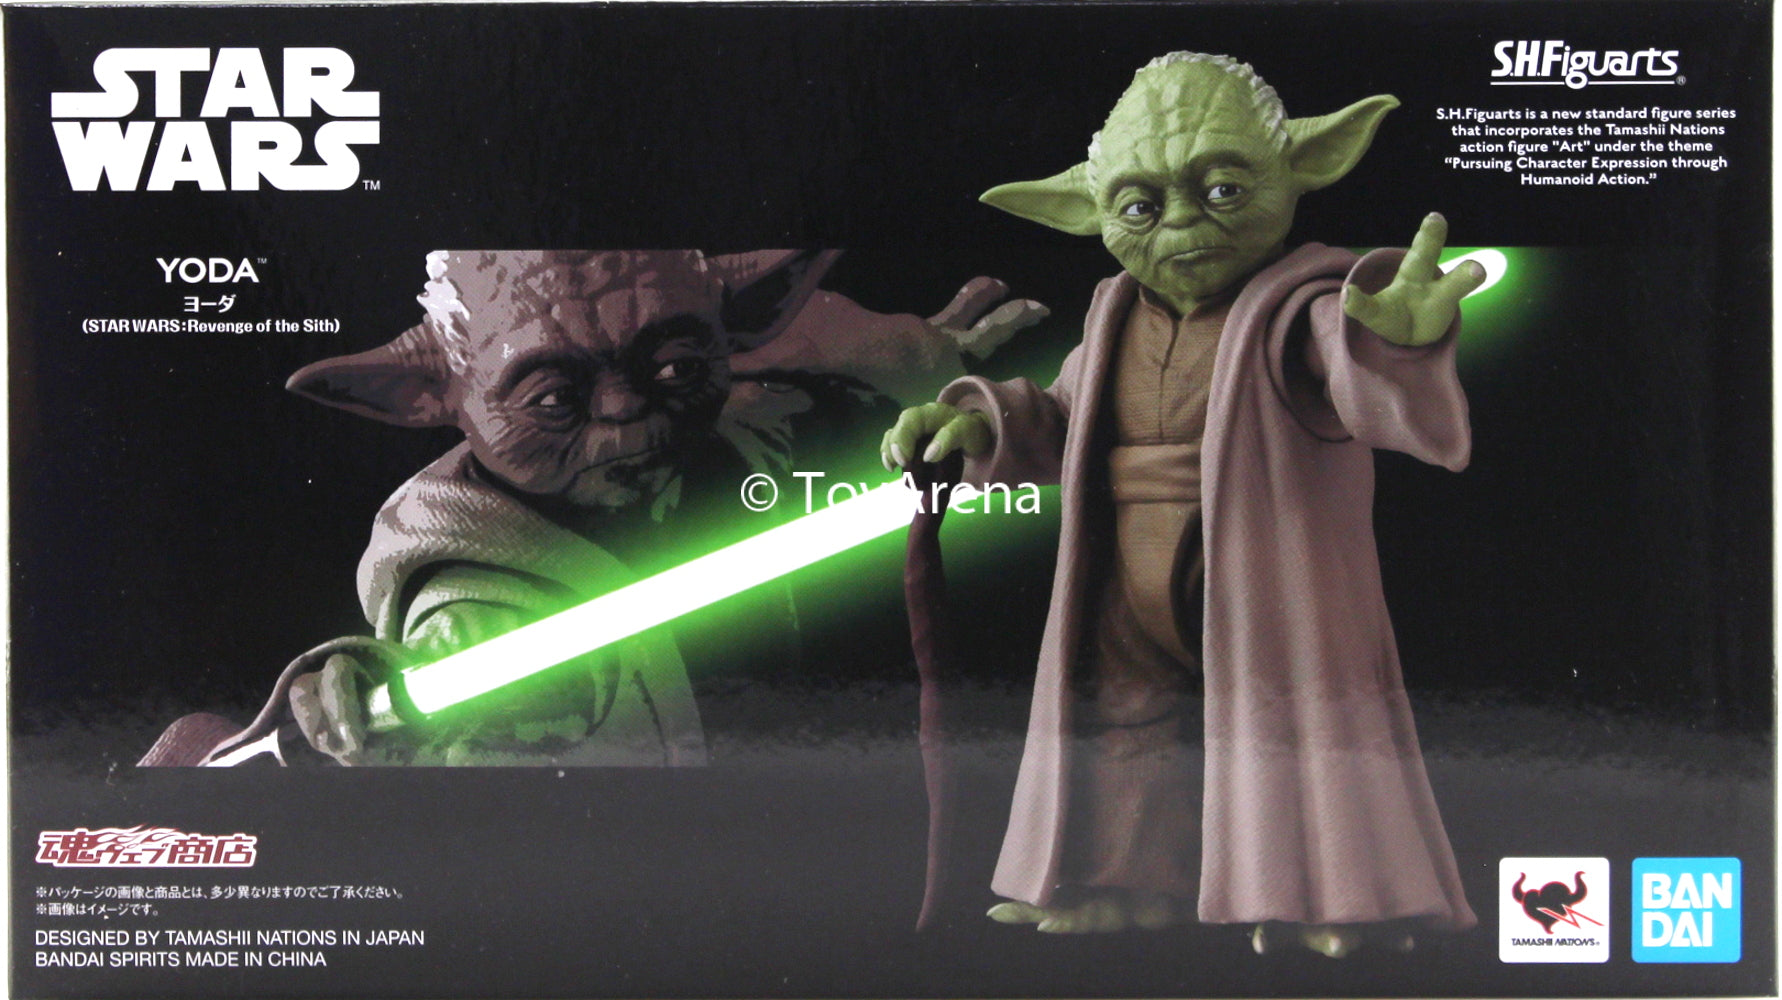 S.H. Figuarts Yoda Revenge of the Sith Star Wars Episode III Action Figure